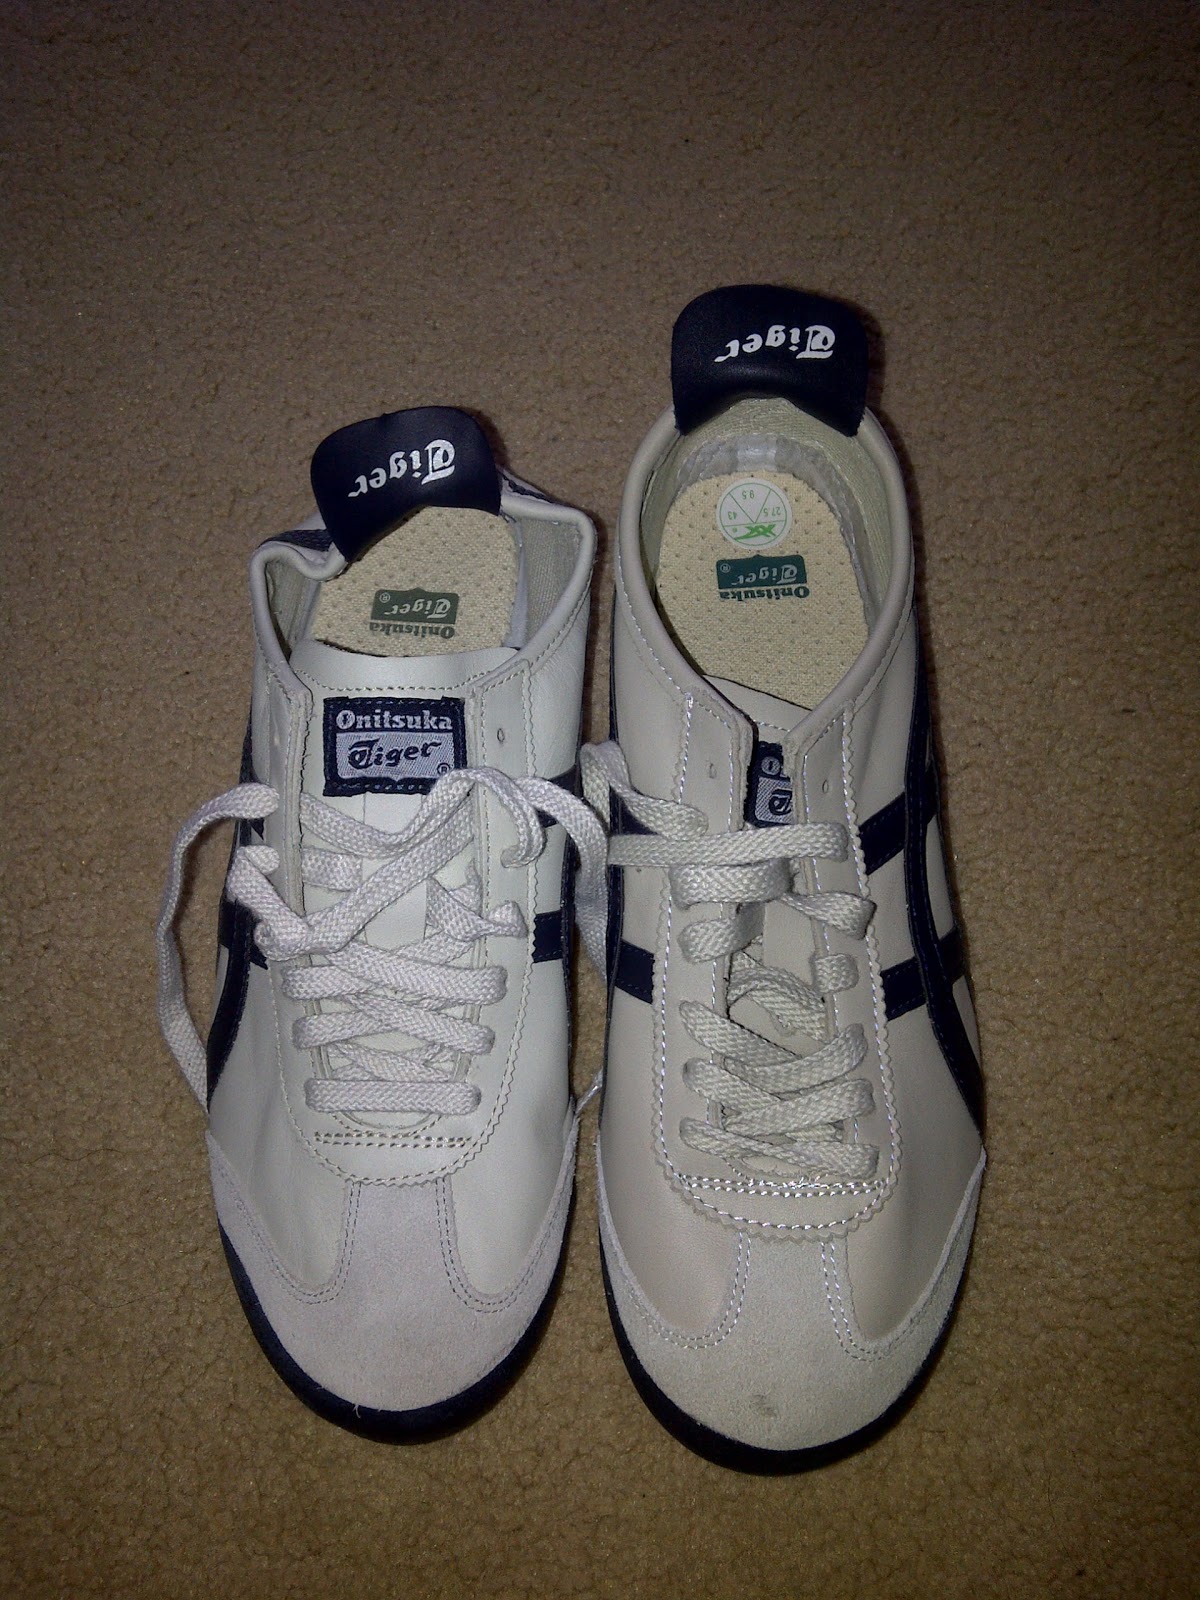 FOOT WEAR GALLERY: HOW TO SPOT FAKE ONITSUKA TIGER 